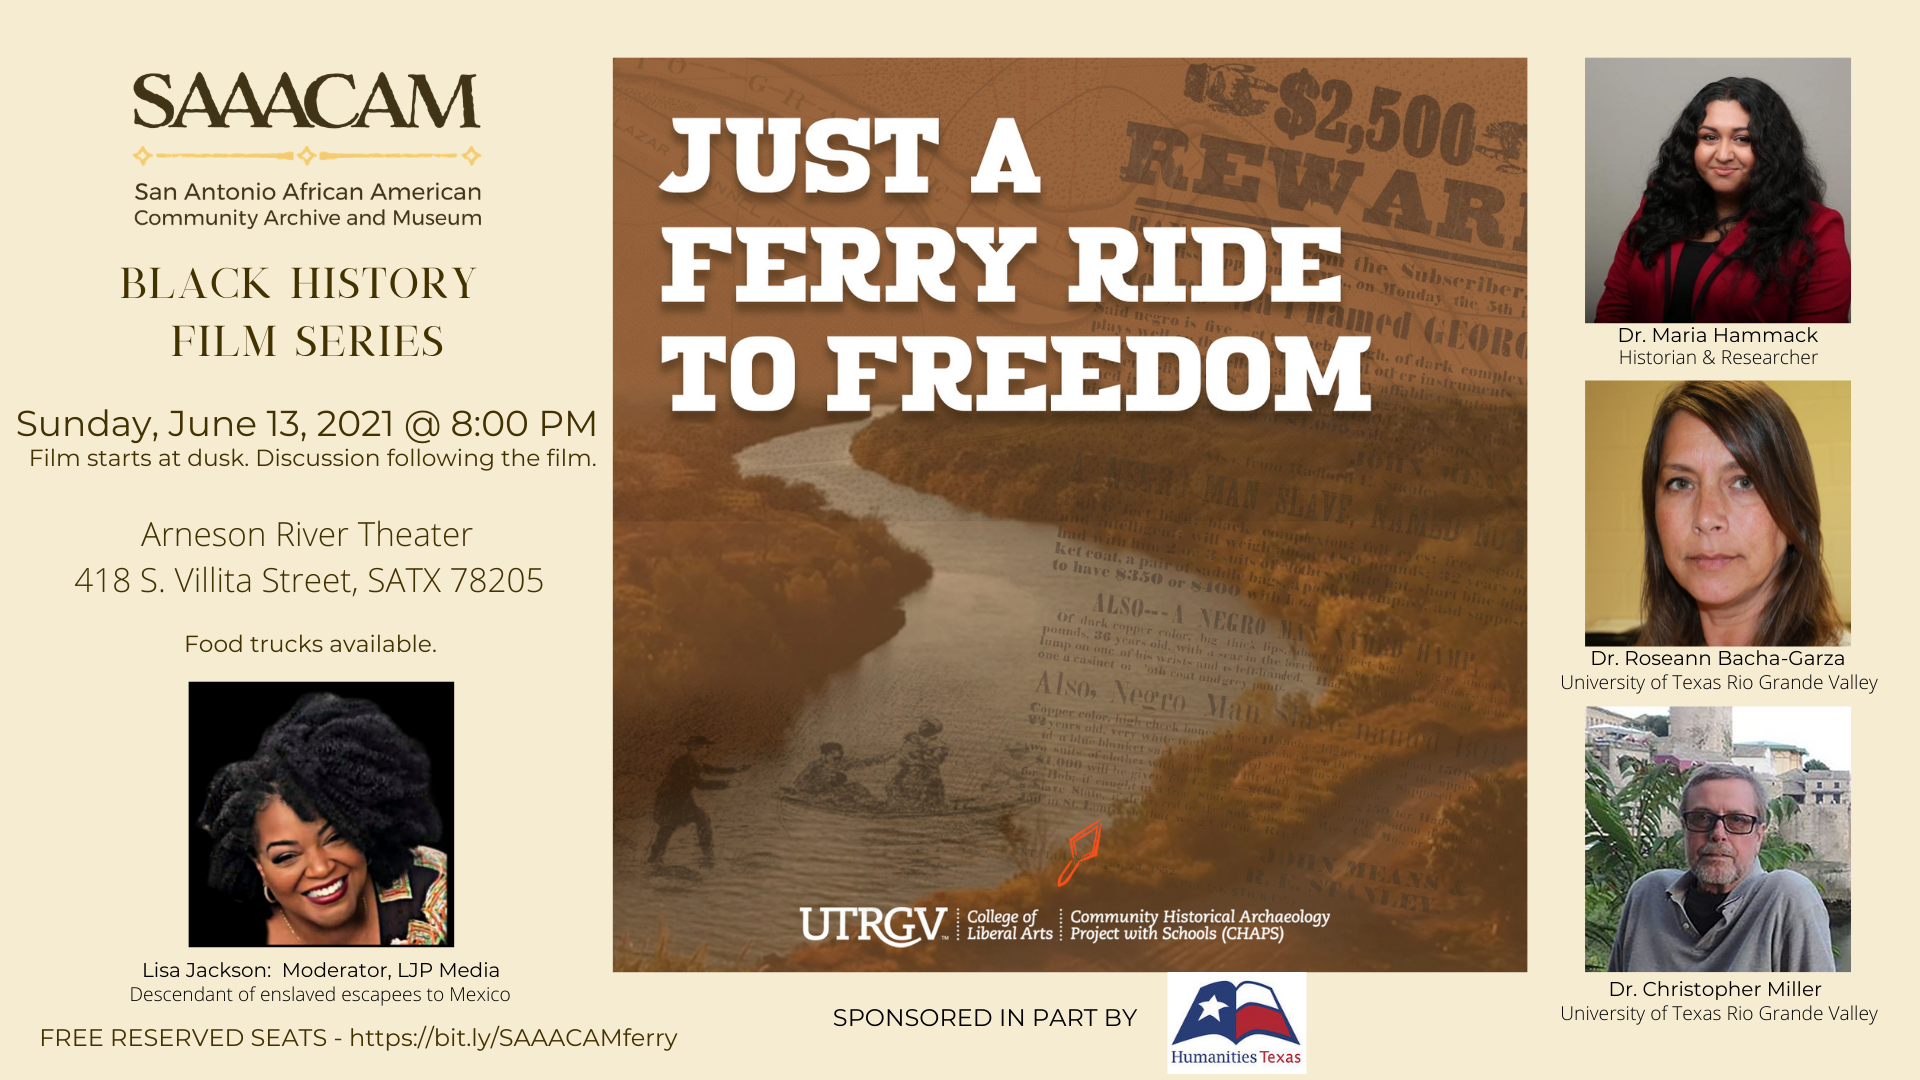 Just a Ferry Ride to Freedom” – Black History Film Series – SAAACAM